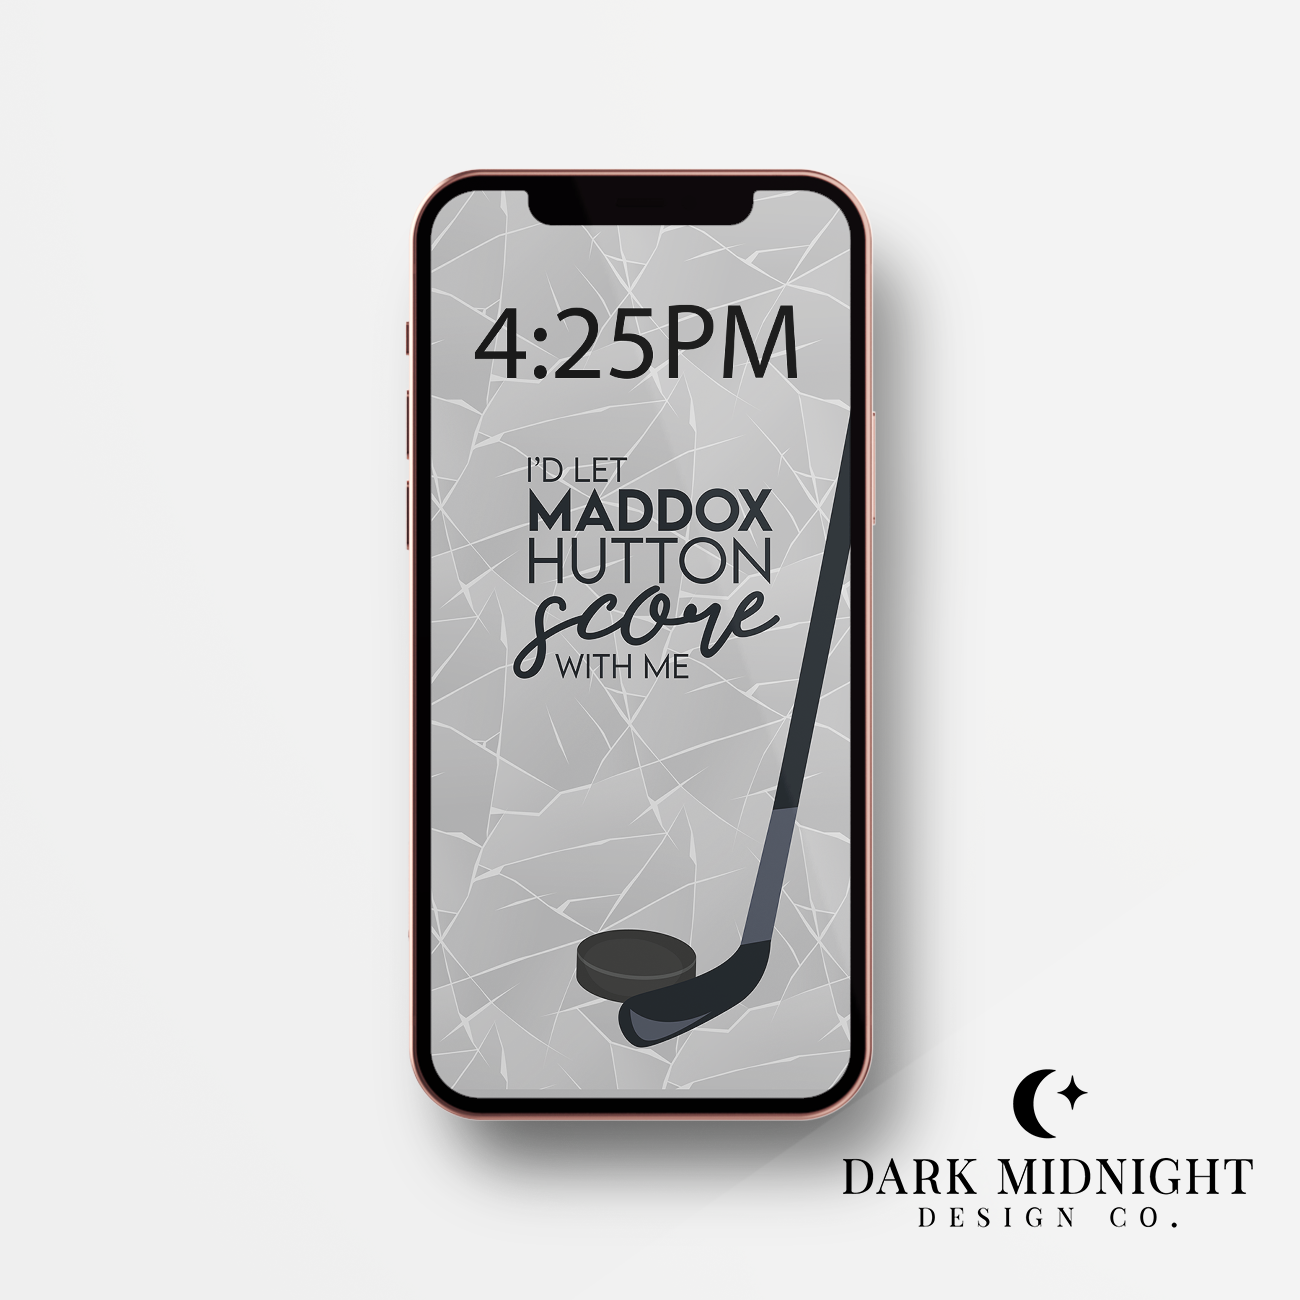 Maddox Hutton Can Score With Me Wallpaper - Officially Licensed Greatest Love Series